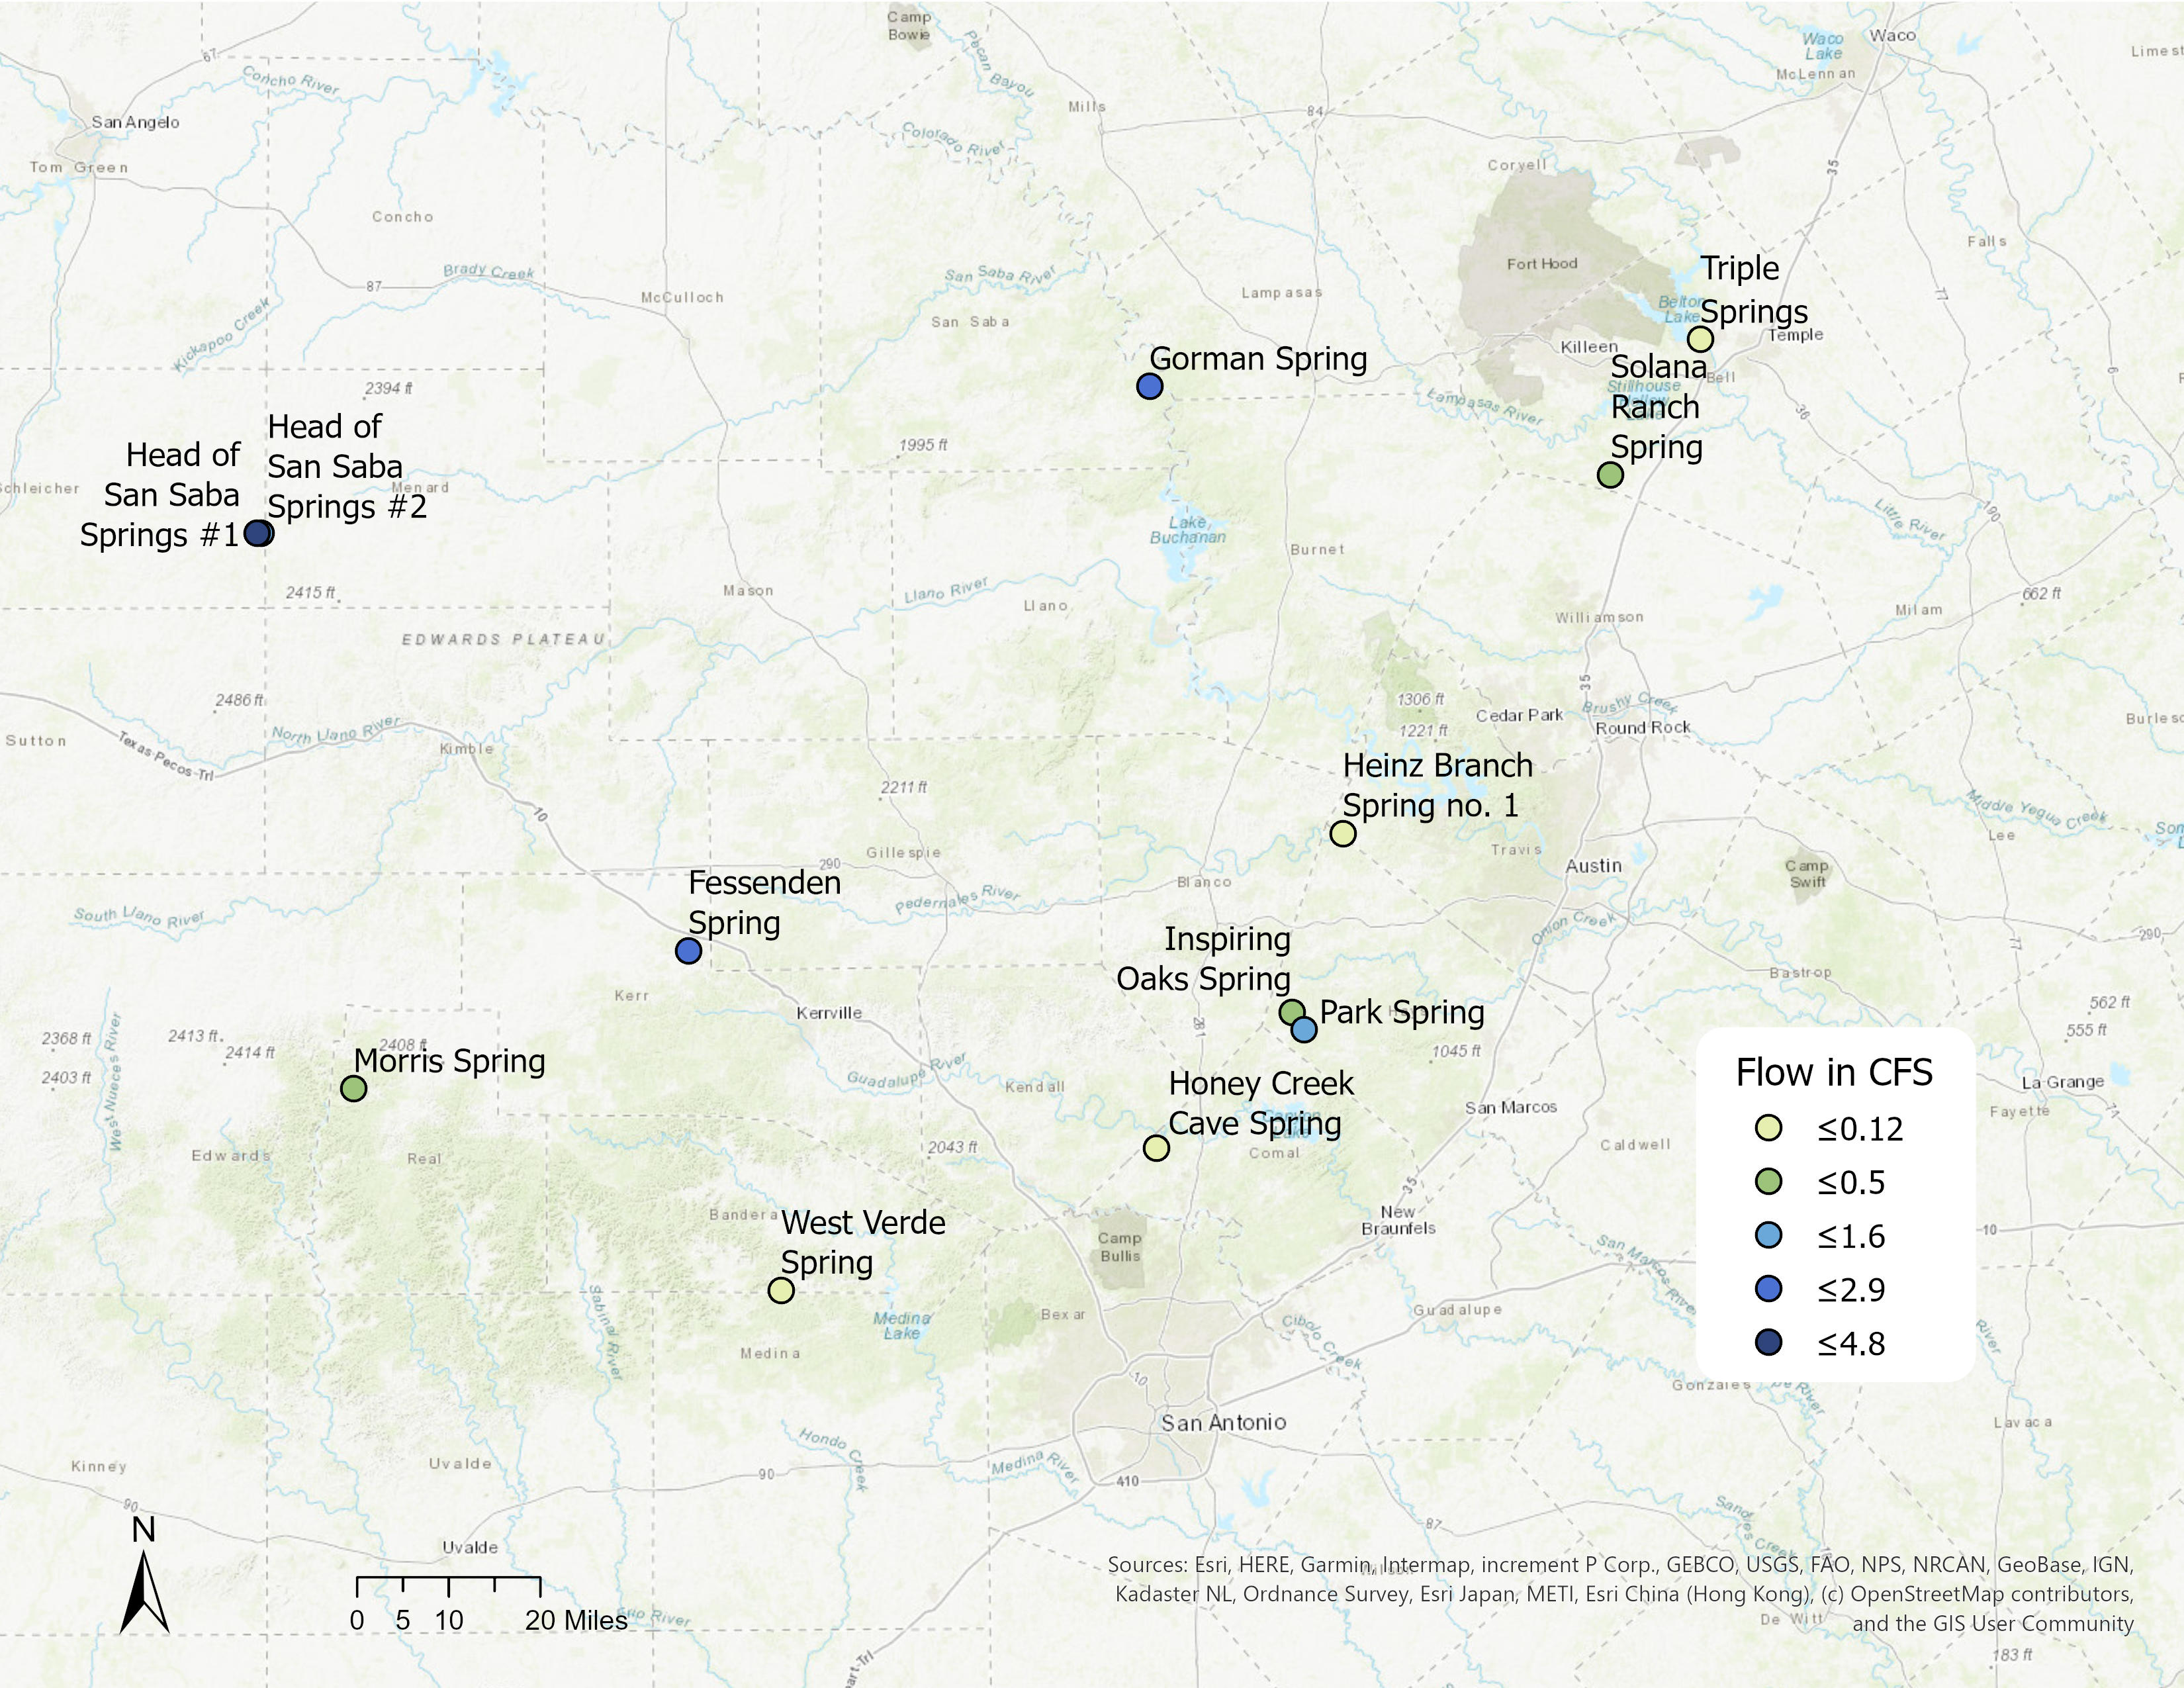 2020 Springs Monitoring Program Locations and Flow Rates. The spring locations displayed in this map are listed below.